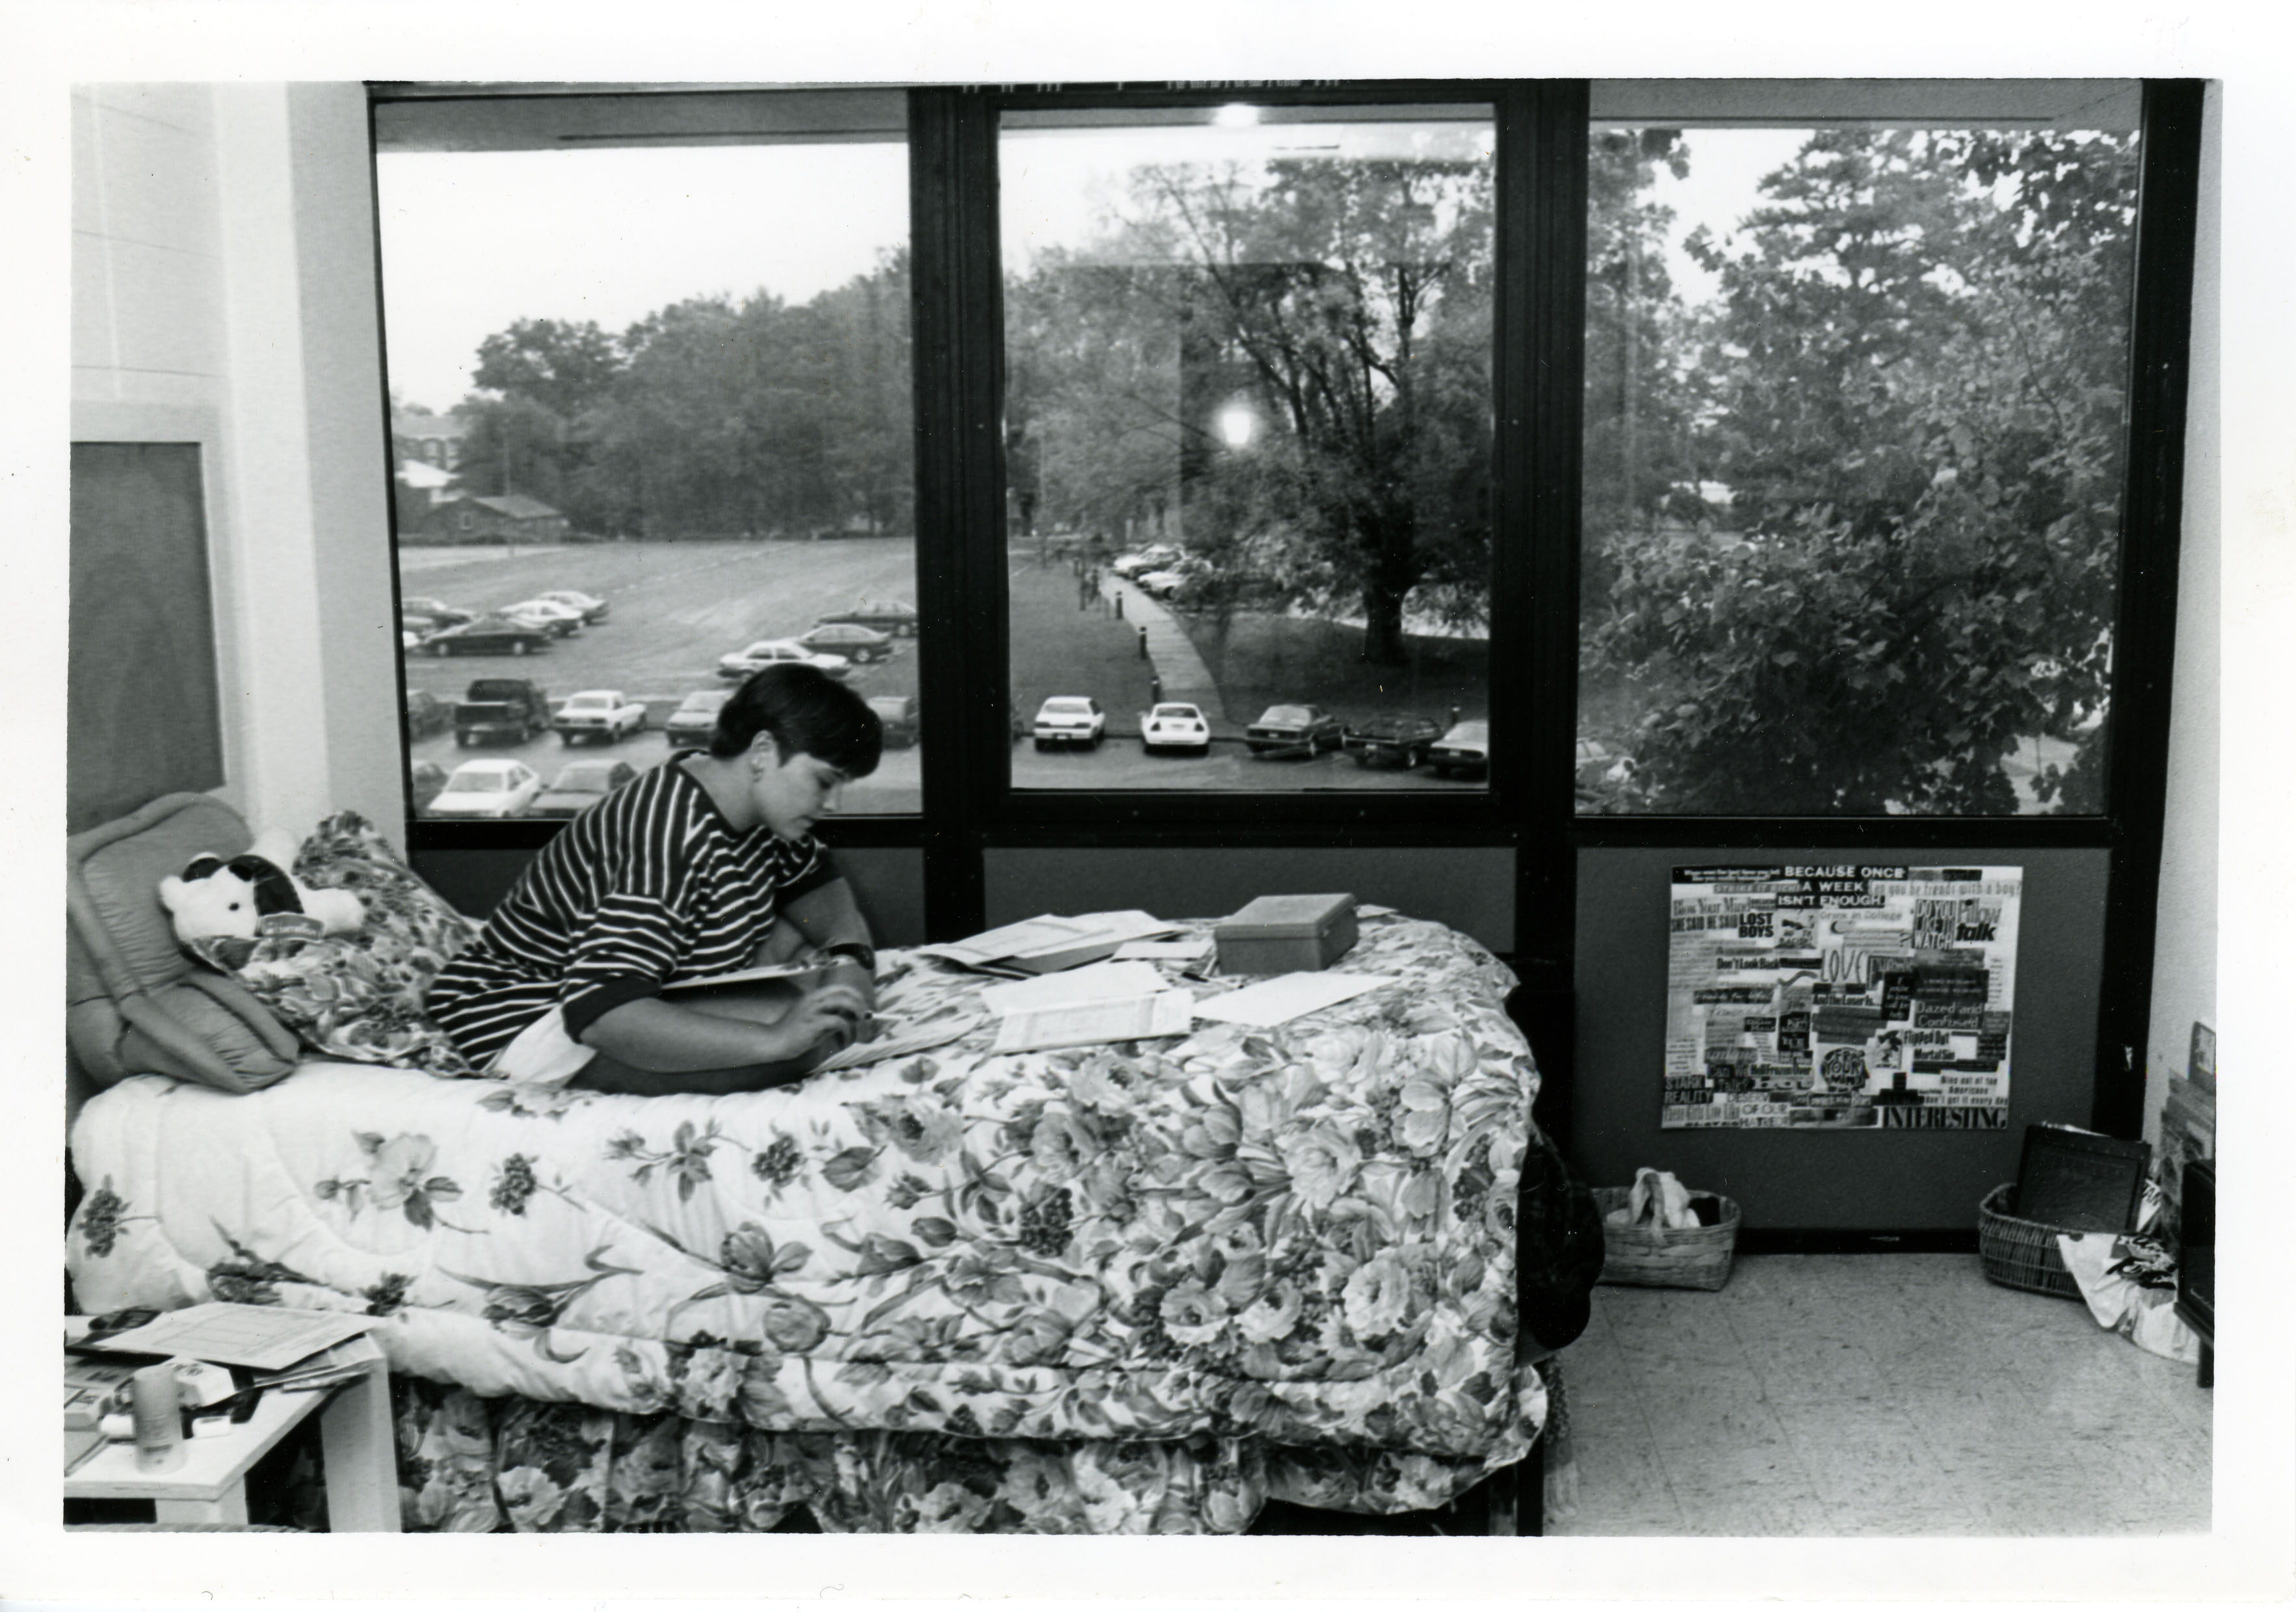 Women reading a book on a bed with a window in the background